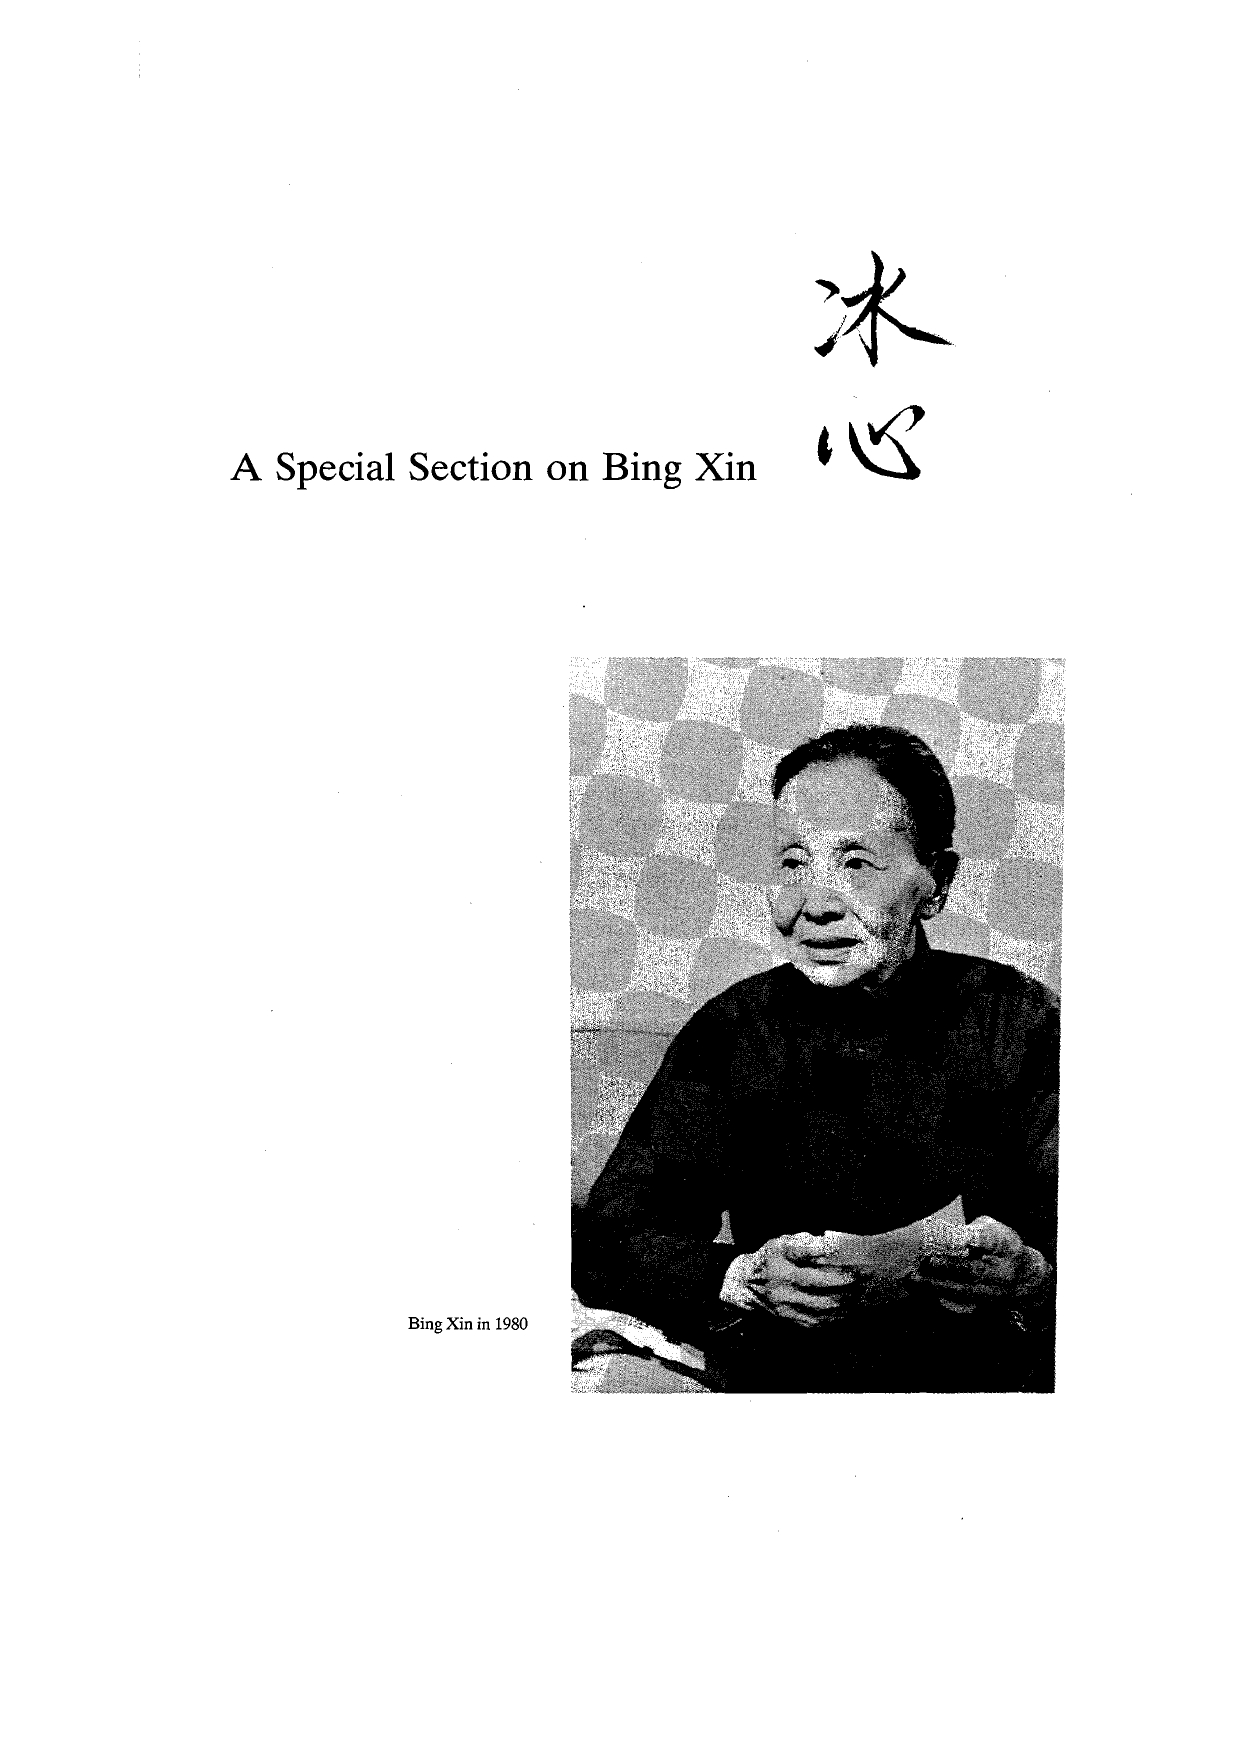 Bing Xin, “Autobiographical Notes,” Renditions – A Special Section on Bing Xin, translated into English by J. Cayley, No. 32, Autumn 1989, pp. 83–87.